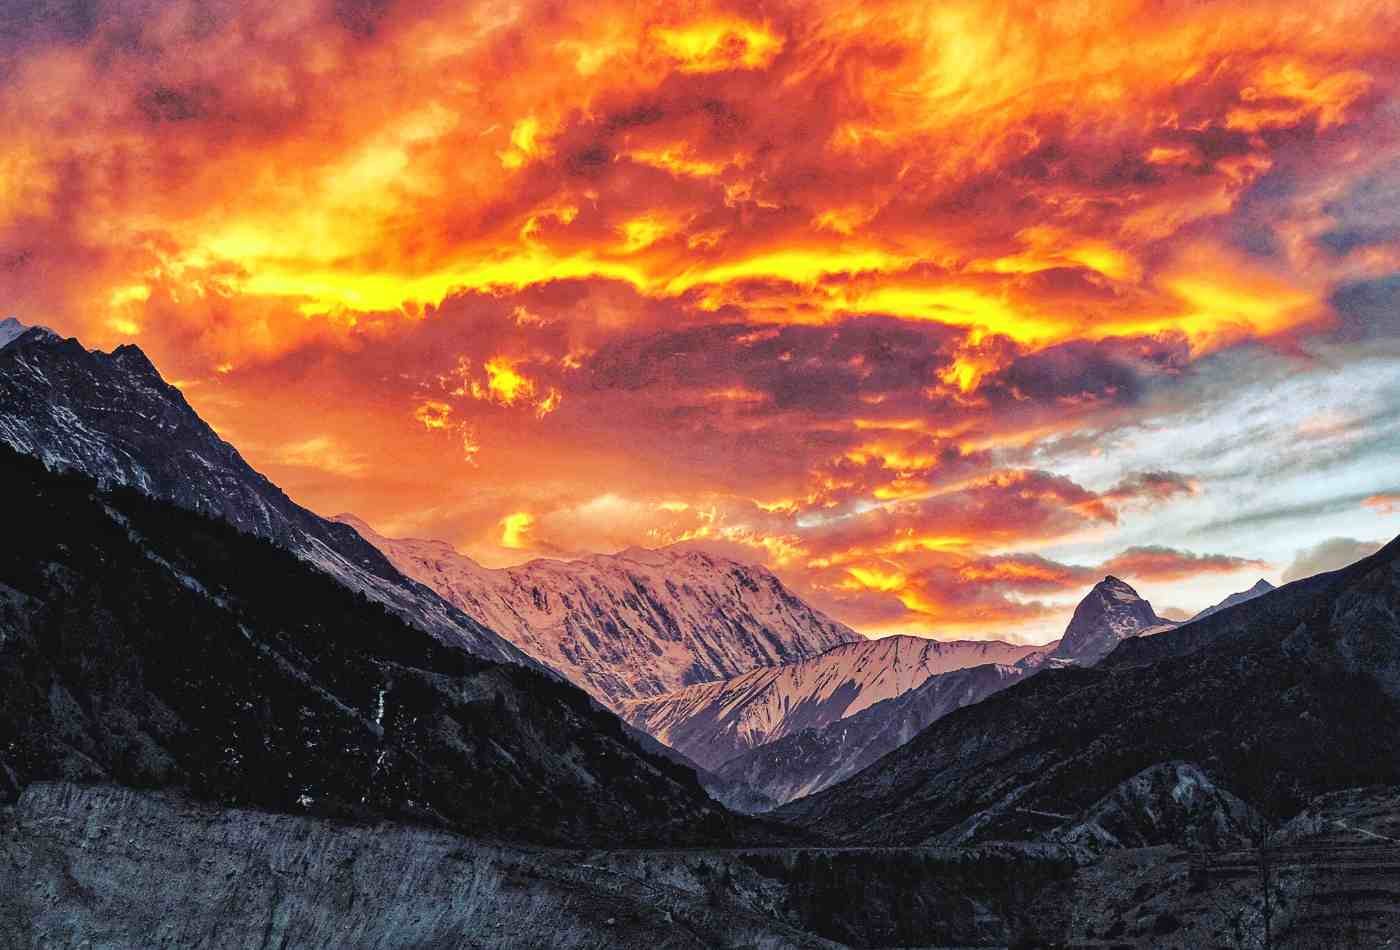 A breathtaking view of Tilicho Peak (7,134m) during sunset with clouds in the sky. The peak stands majestically in the background, with its summit bathed in warm orange and pink hues of the setting sun